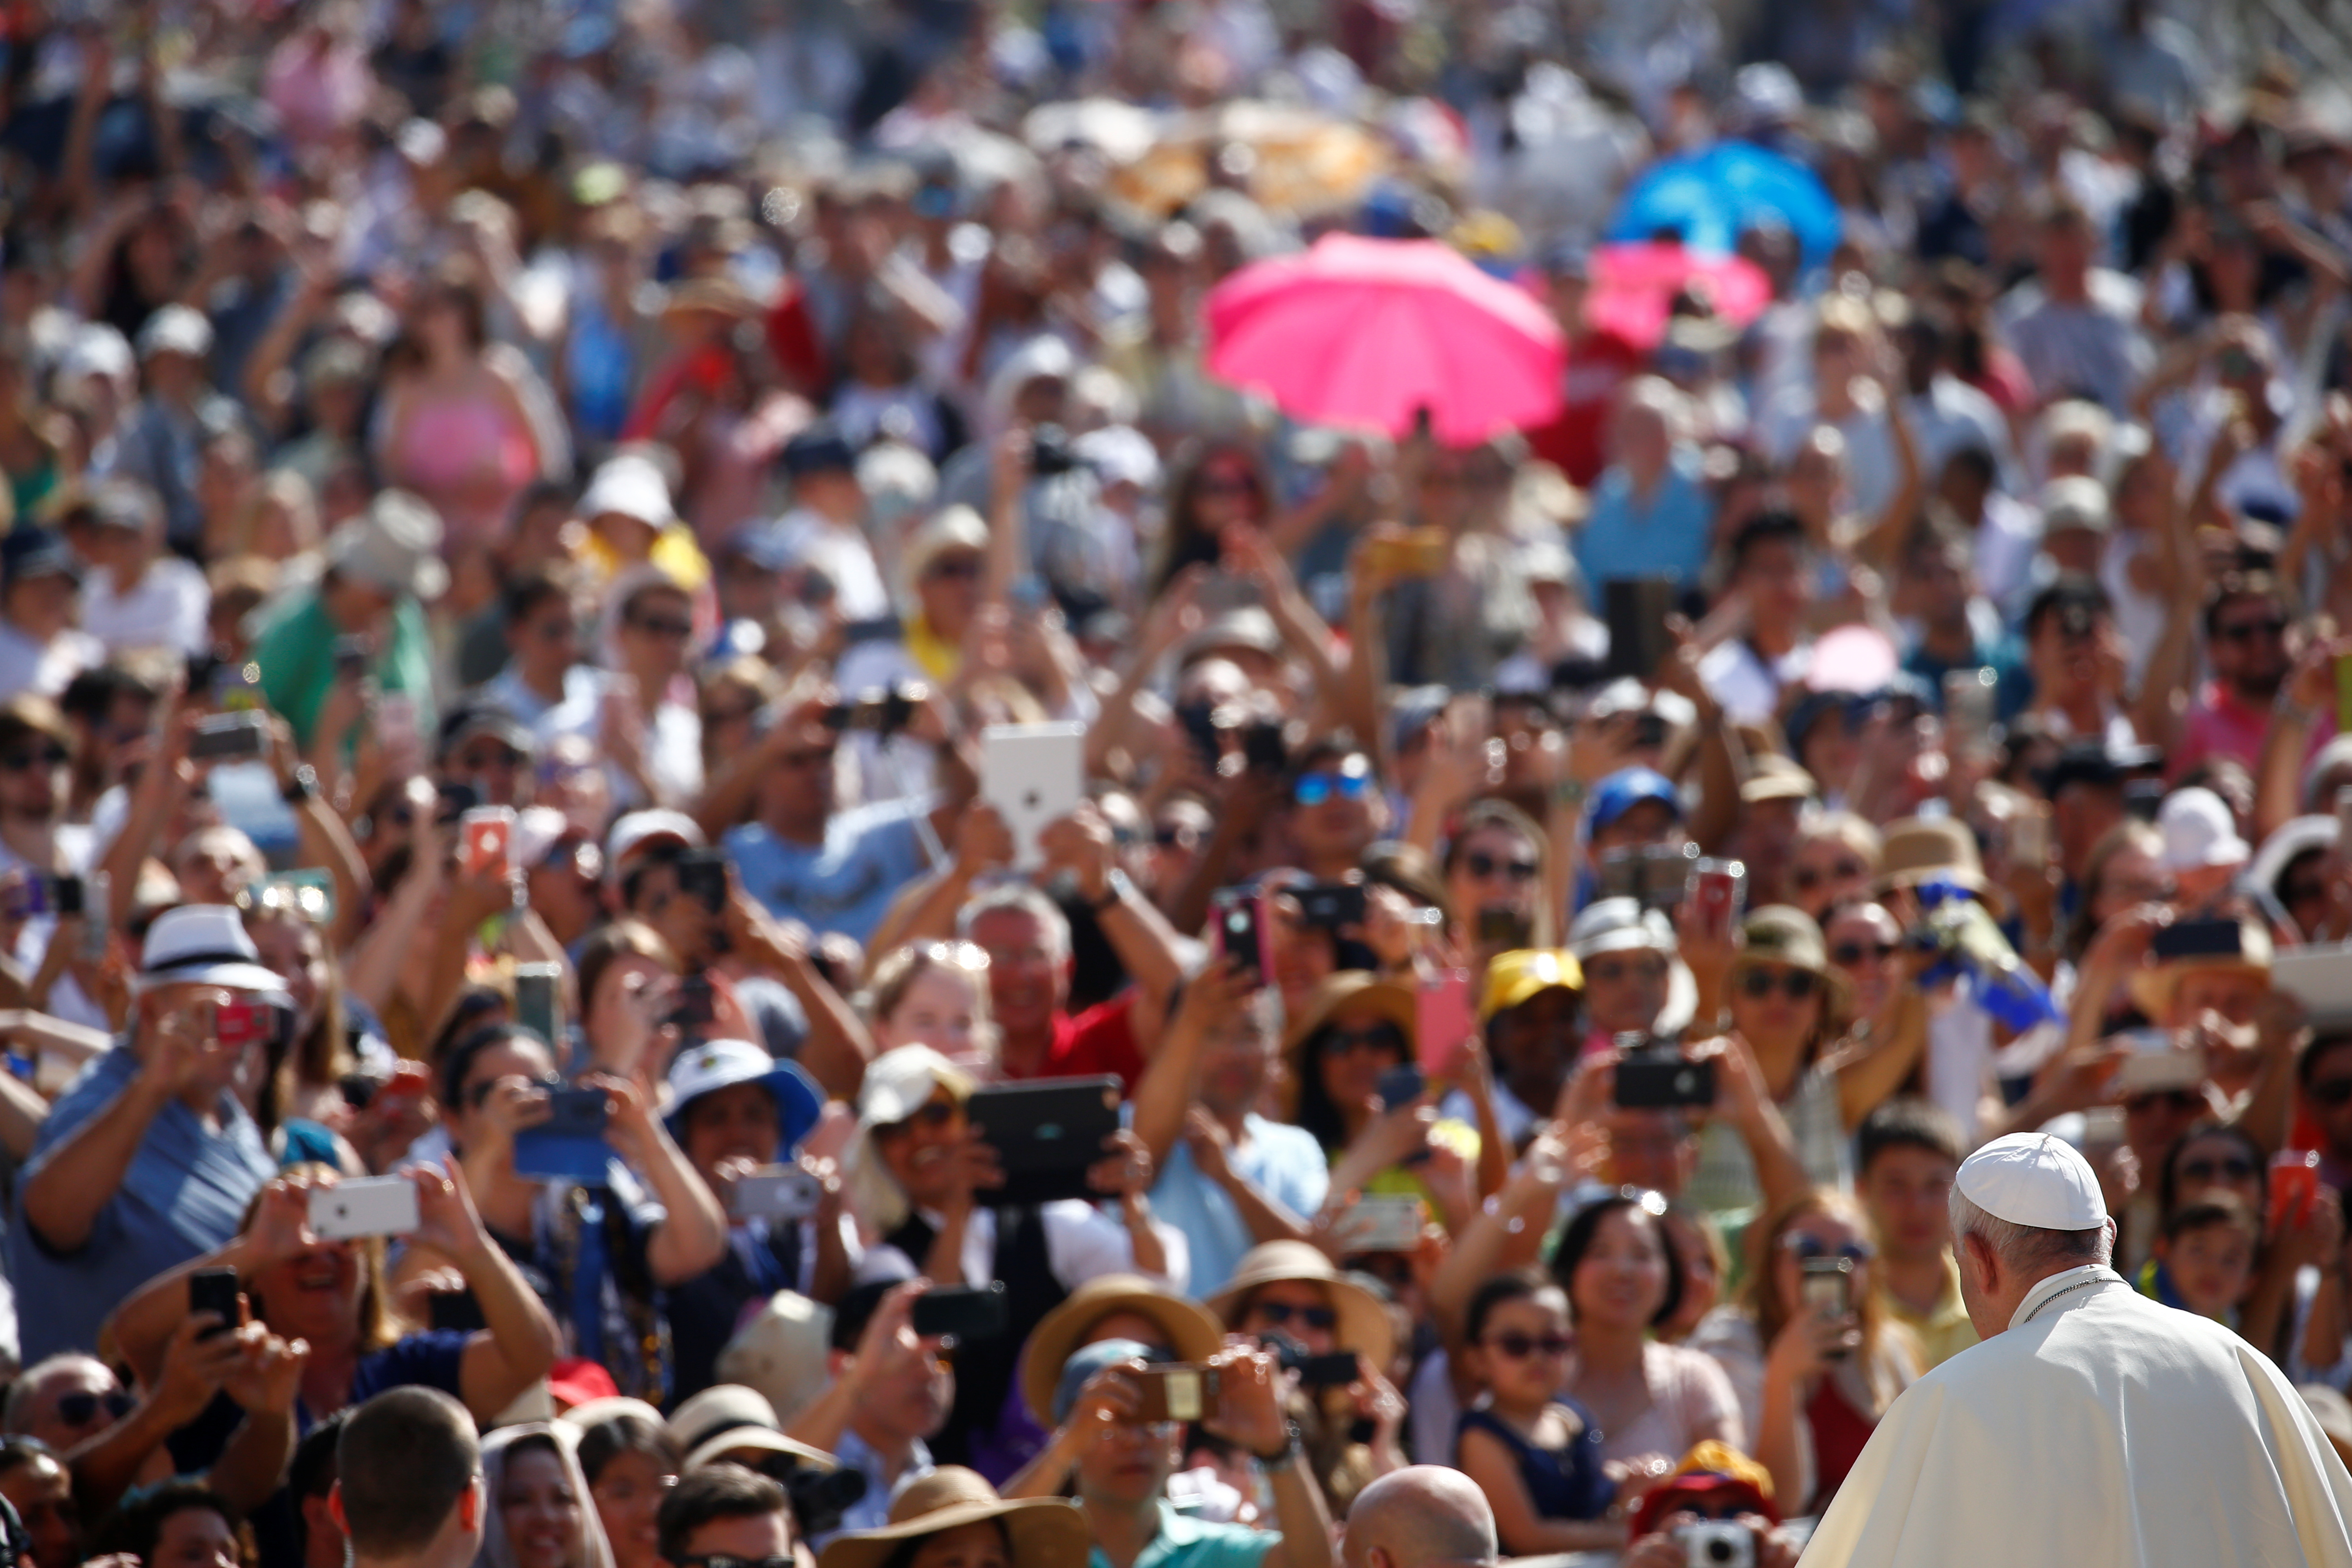 Holy Spirit conducts symphony of communion, pope says at audience